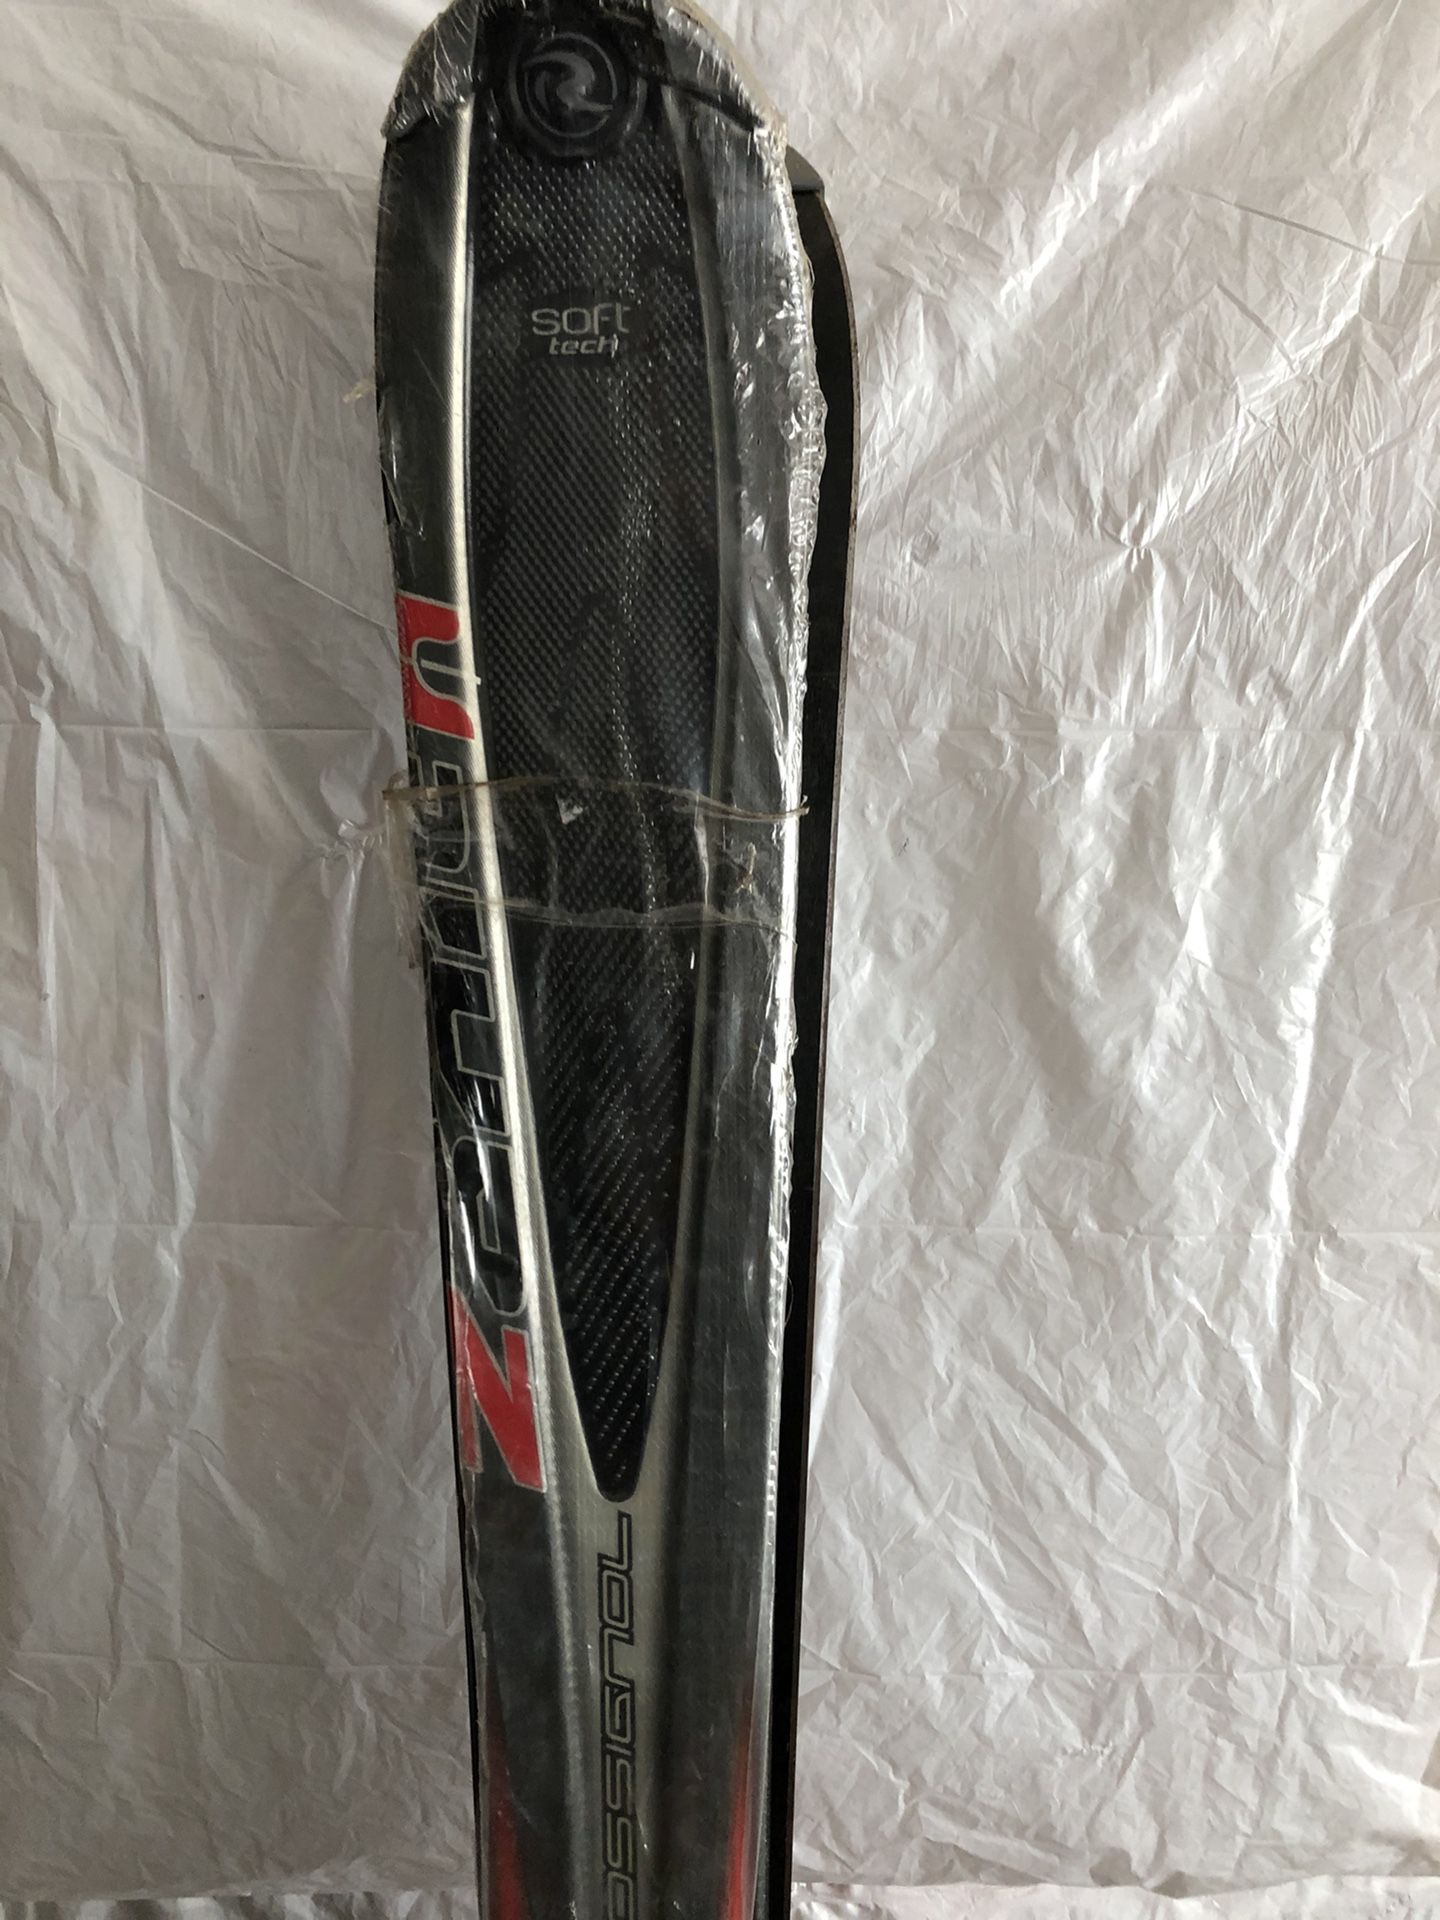 Brand New In Plastic Rossignol 178cm Skis Best Most Responsive Ski Made